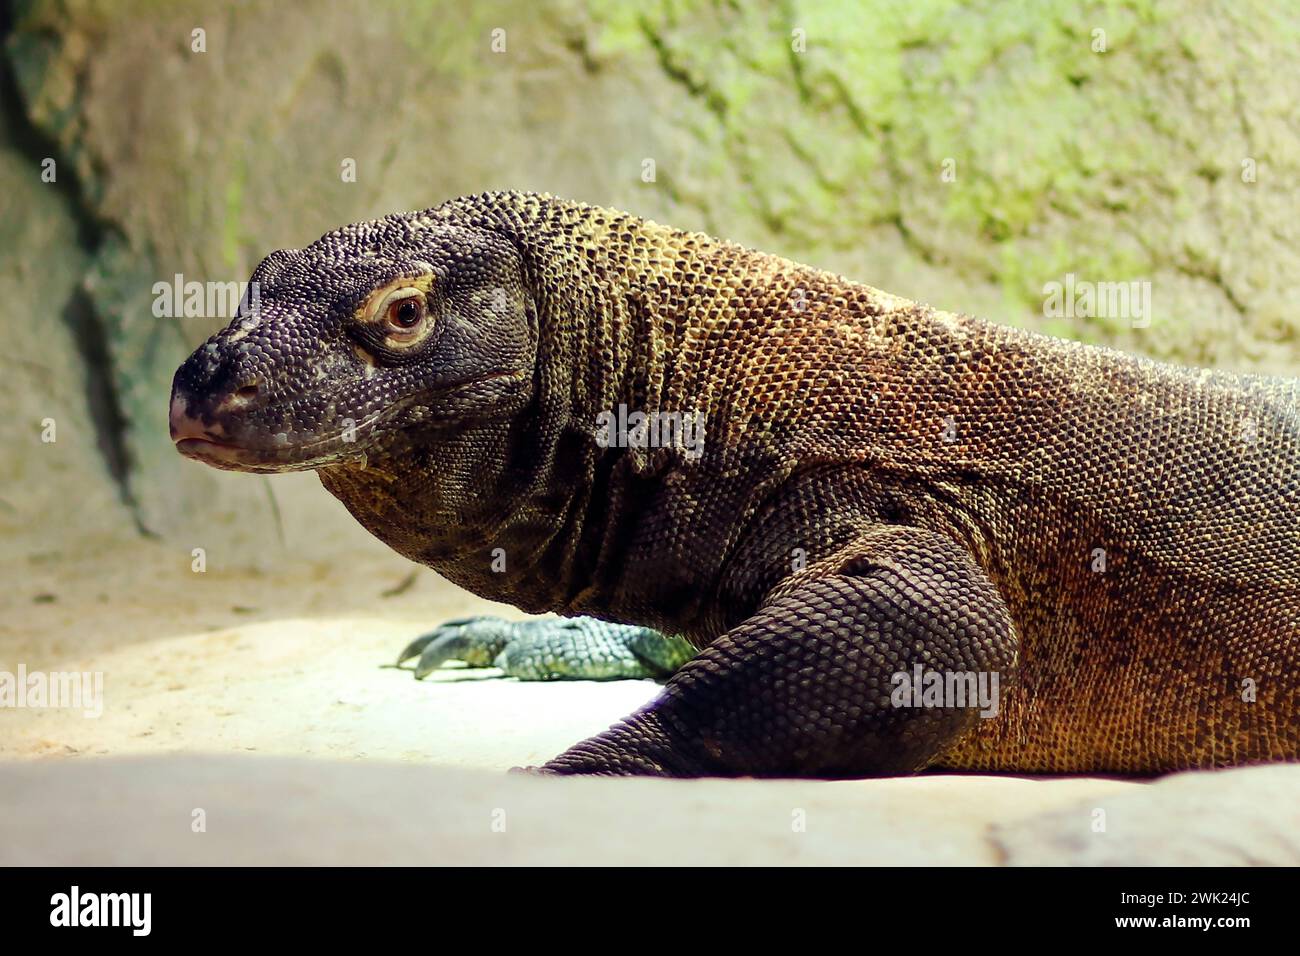 Komodo dragon, also known as the Komodo monitor, is a member of the monitor lizard family Varanidae that is endemic to the Indonesian islands Stock Photo